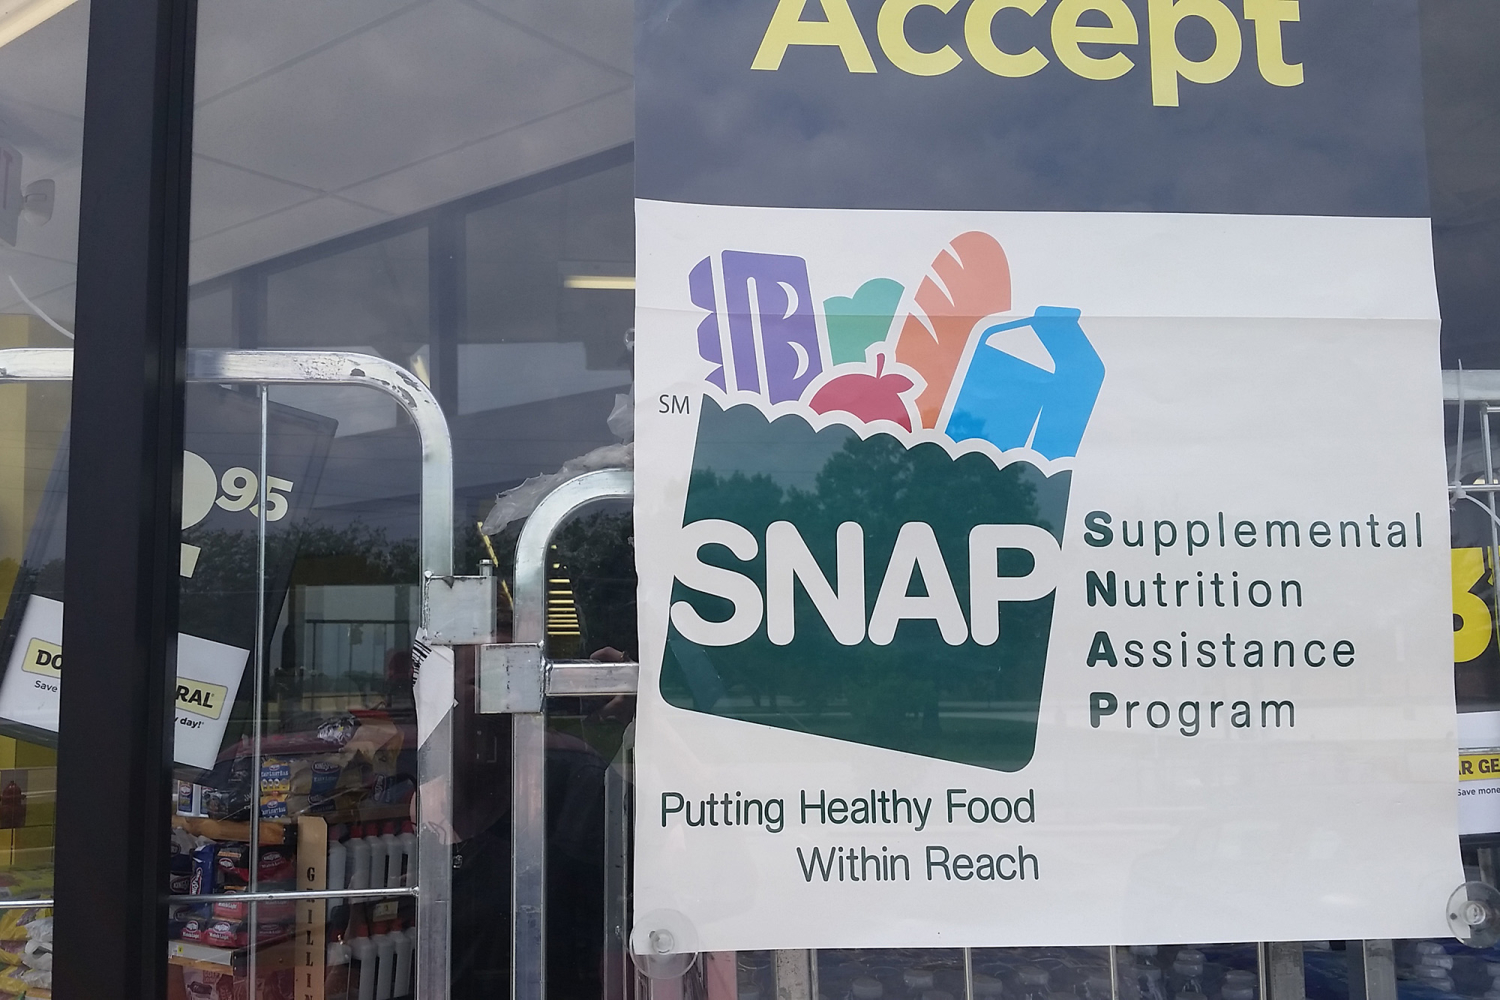 Food banks in Indiana are the federal SNAP performance increase